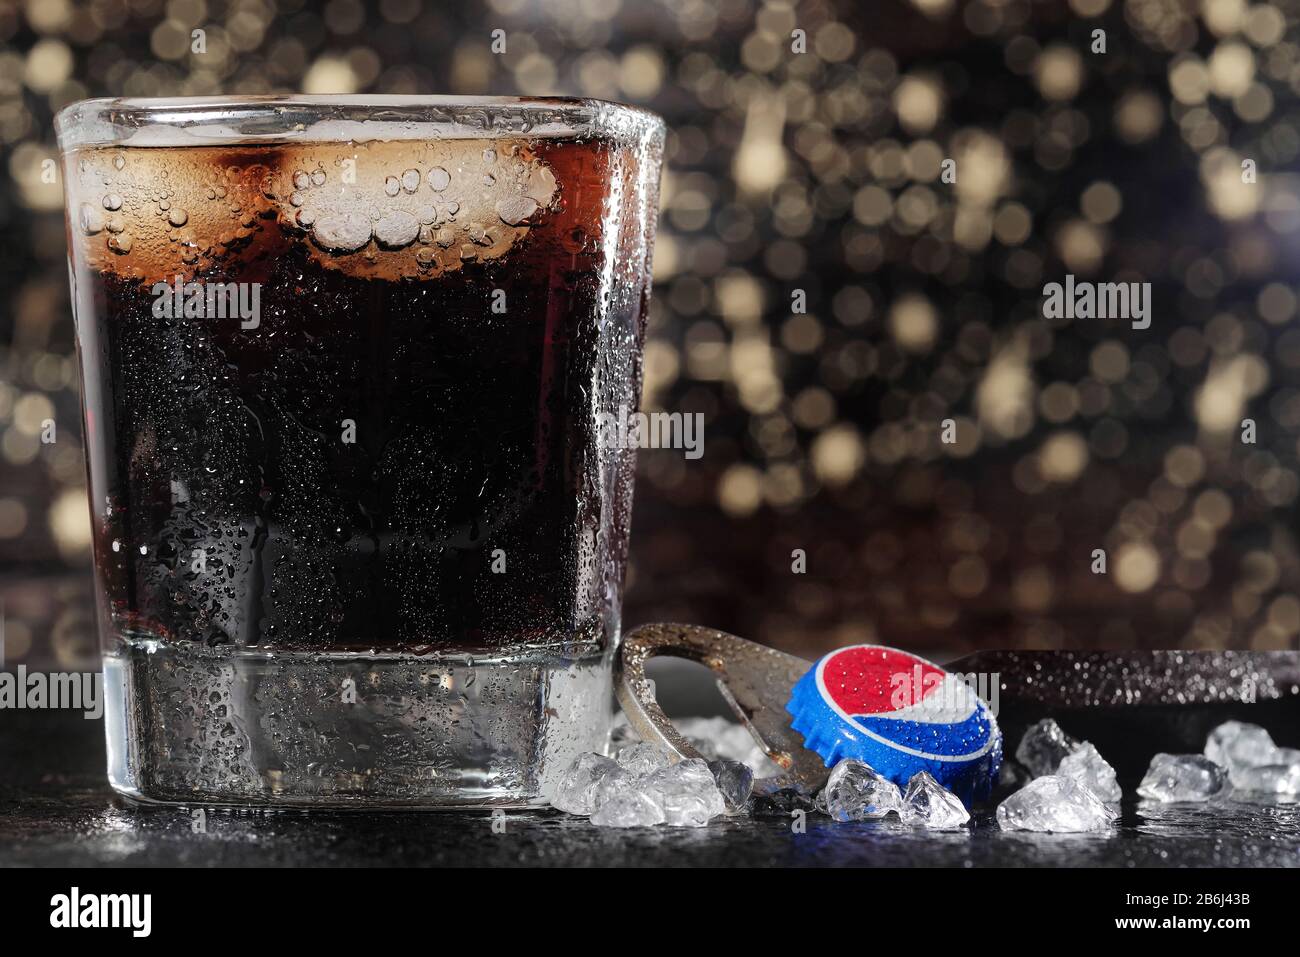 Koszalin, Poland - March 11, 2020: cool Pepsi drink with ice . Pepsi is popular carbonated soft drink manufactured by PepsiCo Stock Photo